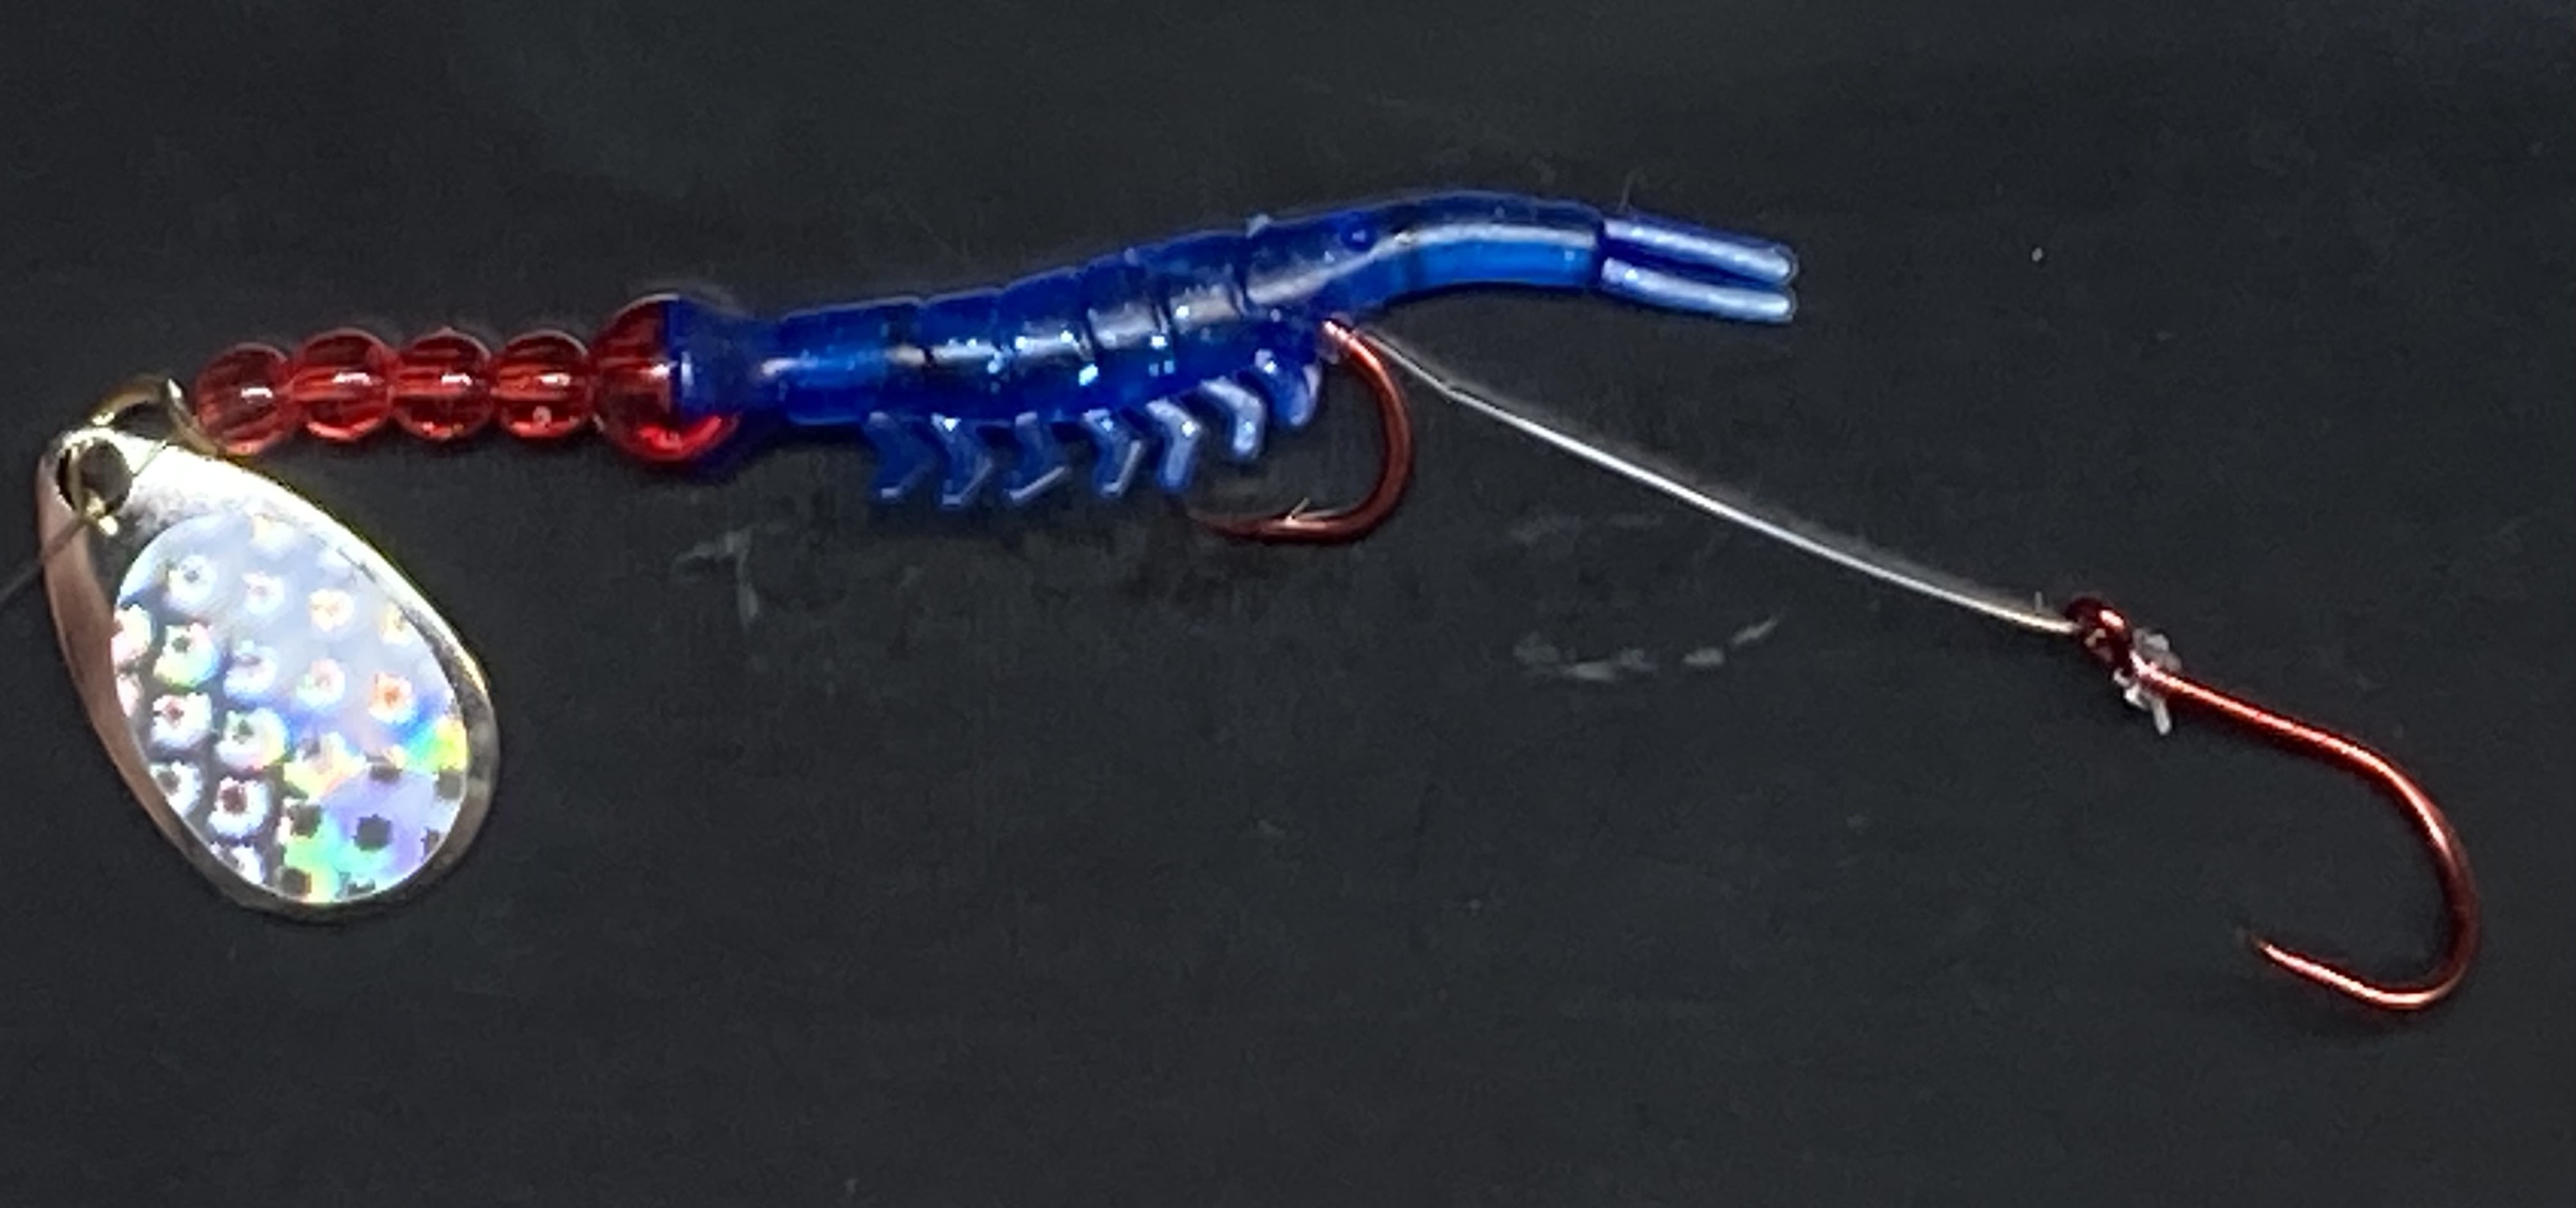 Blue Ruby Red on Nickel/Silver Scale - Savage Micro Shrimp - Kokanee and  Trout - Savage Micro Shrimp Spinners - Savage Strike Spinners